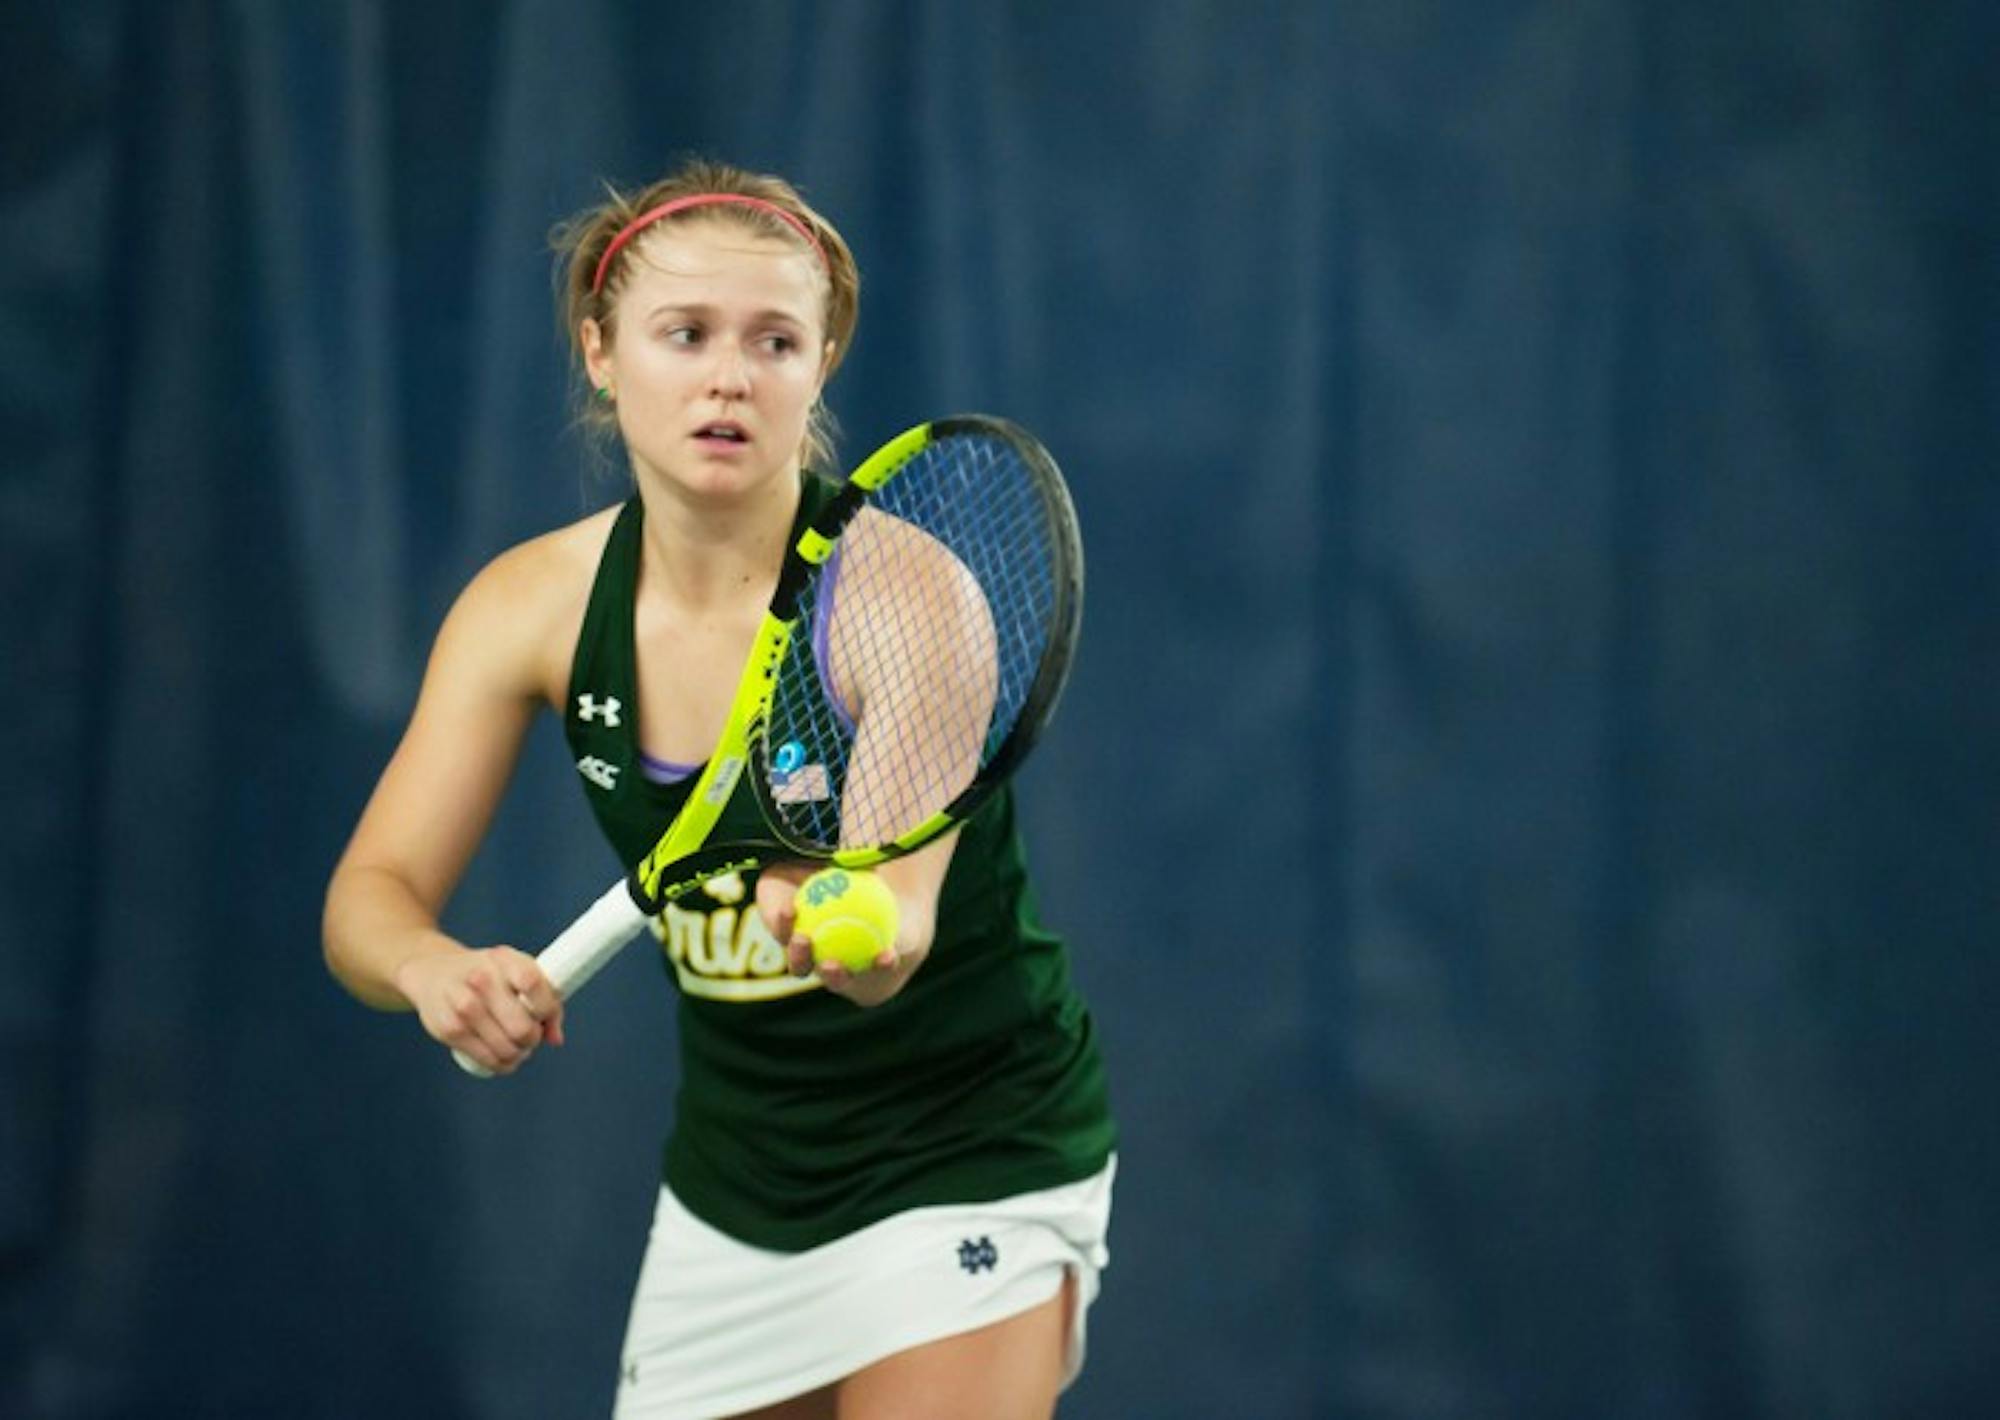 Irish senior Monica Robinson prepares to serve the ball during Notre Dame’s 5-2 win over Purdue on Feb. 22 at Eck Tennis Pavilion. Robinson picked up her first win over a top-50 opponent of the season during Notre Dame’s 5-2 win over Miami on Sunday.